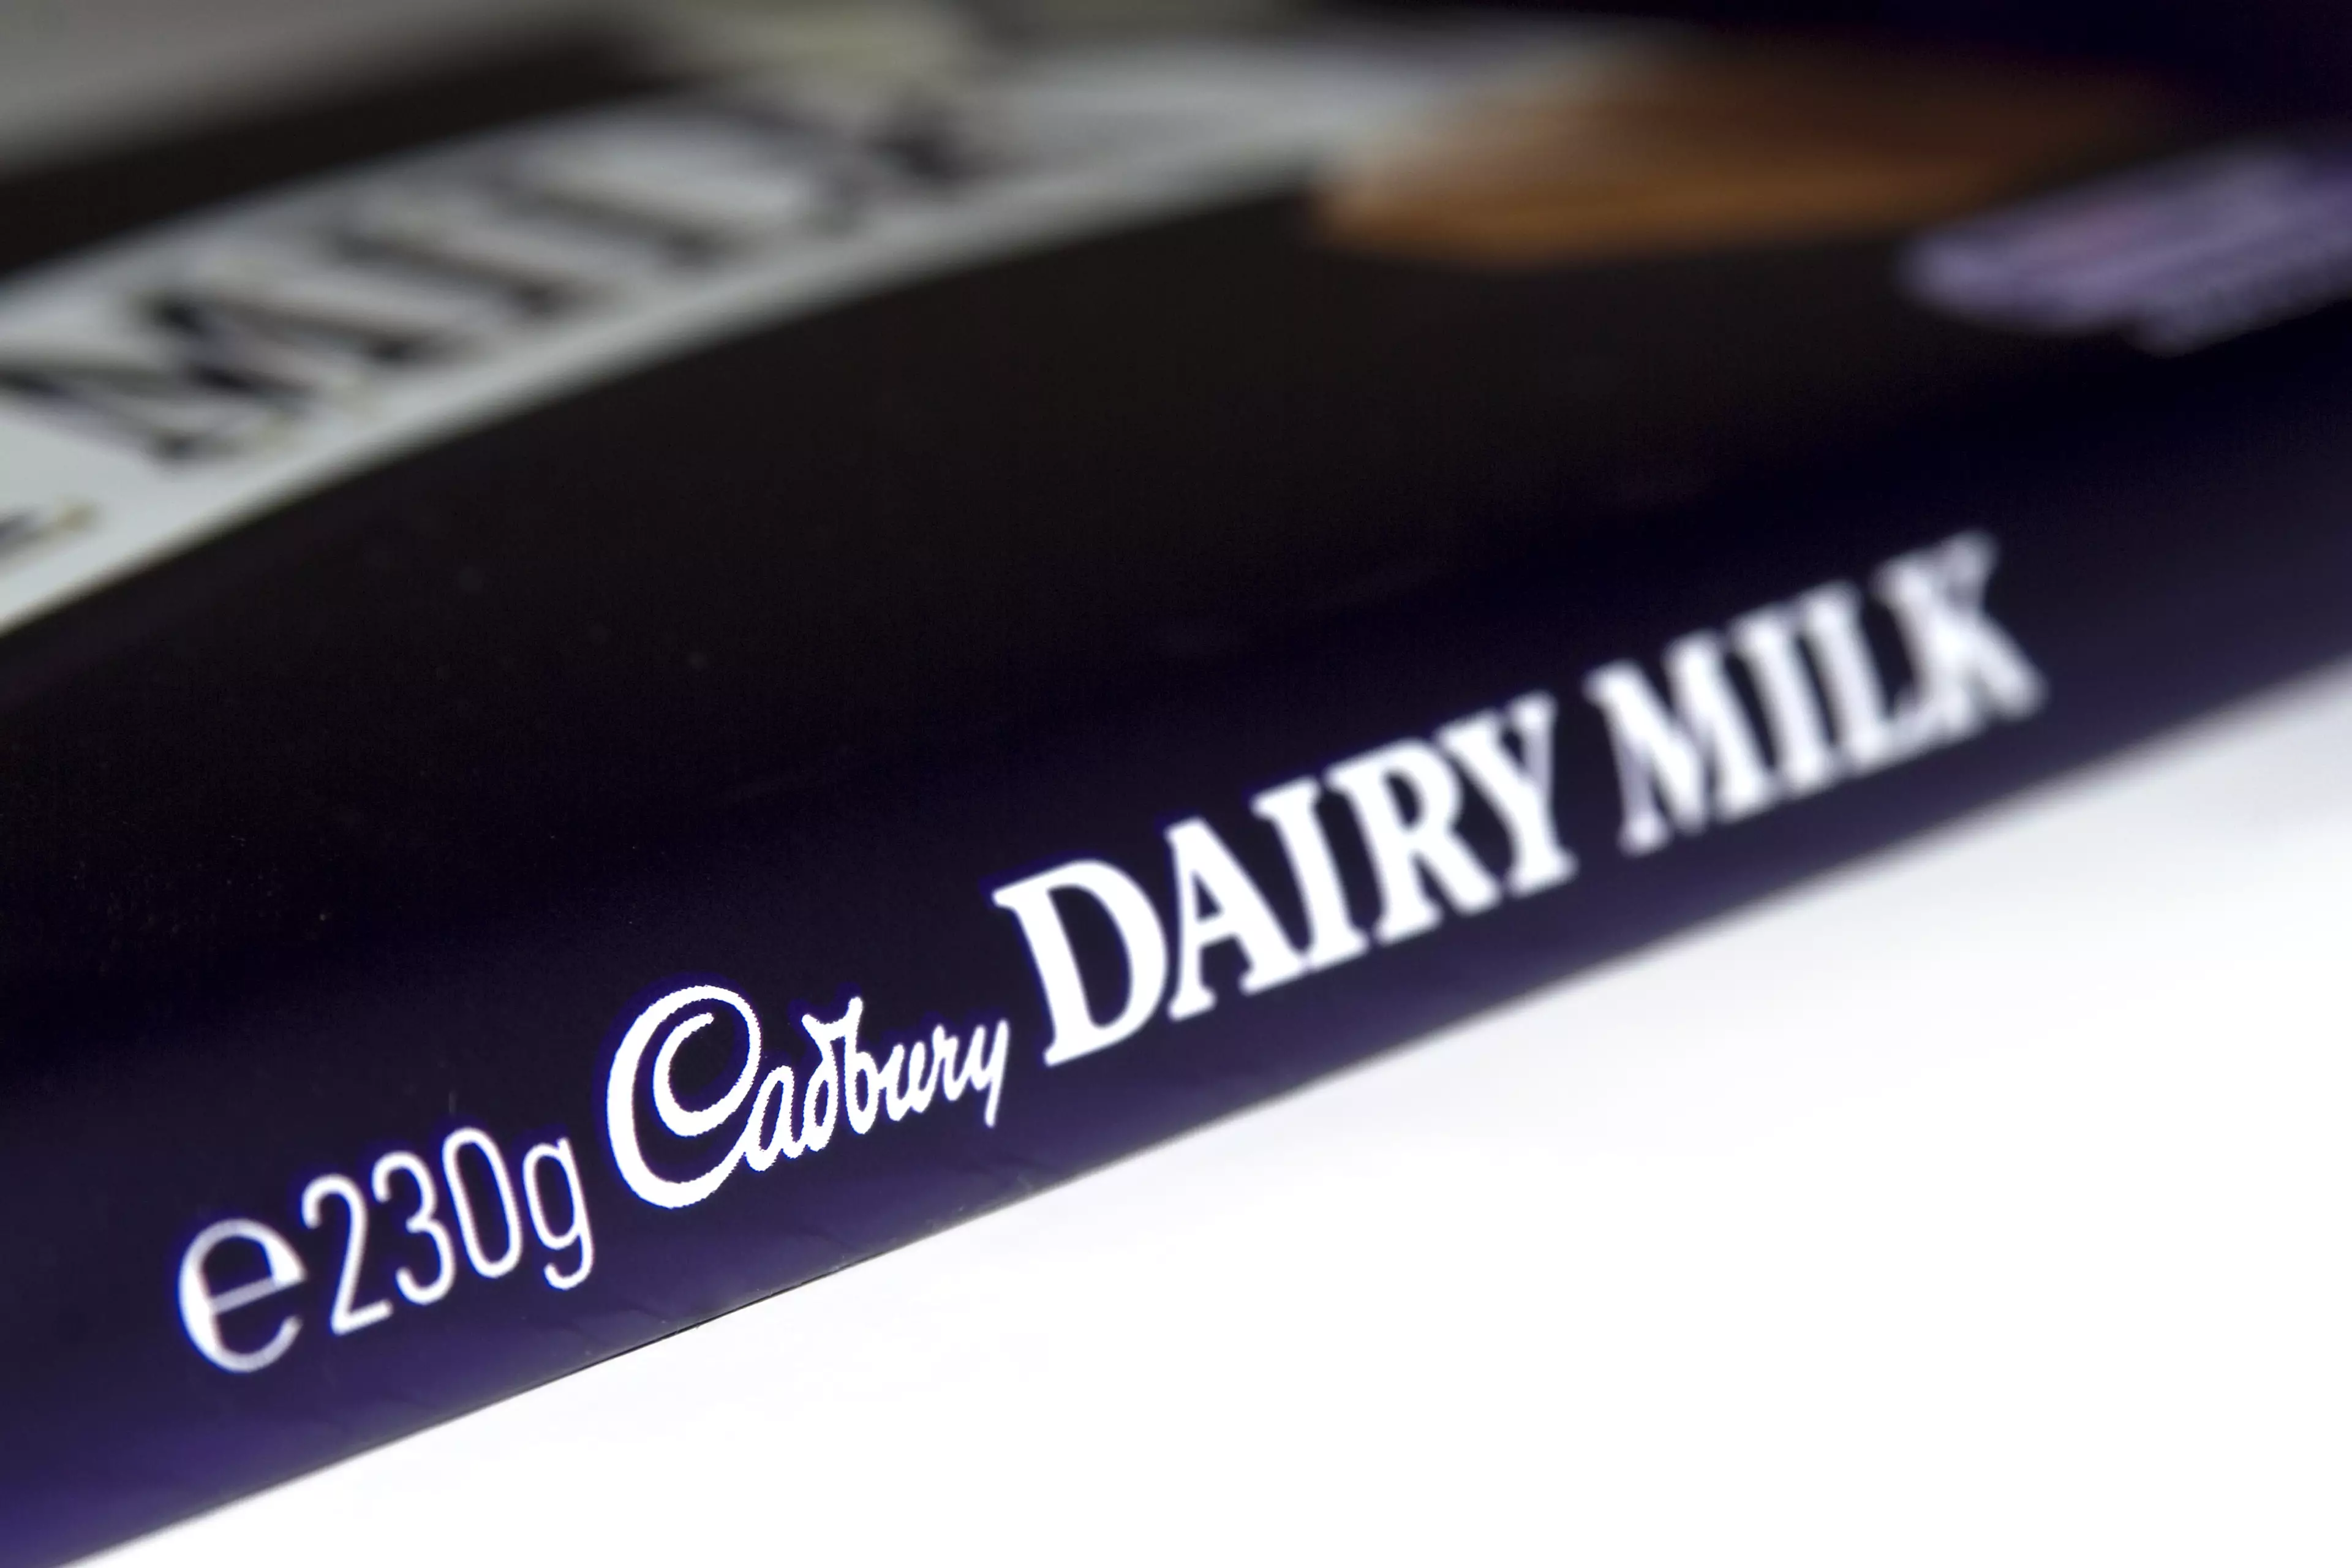 The Dairy Milk bar doesn't have a launch date yet.